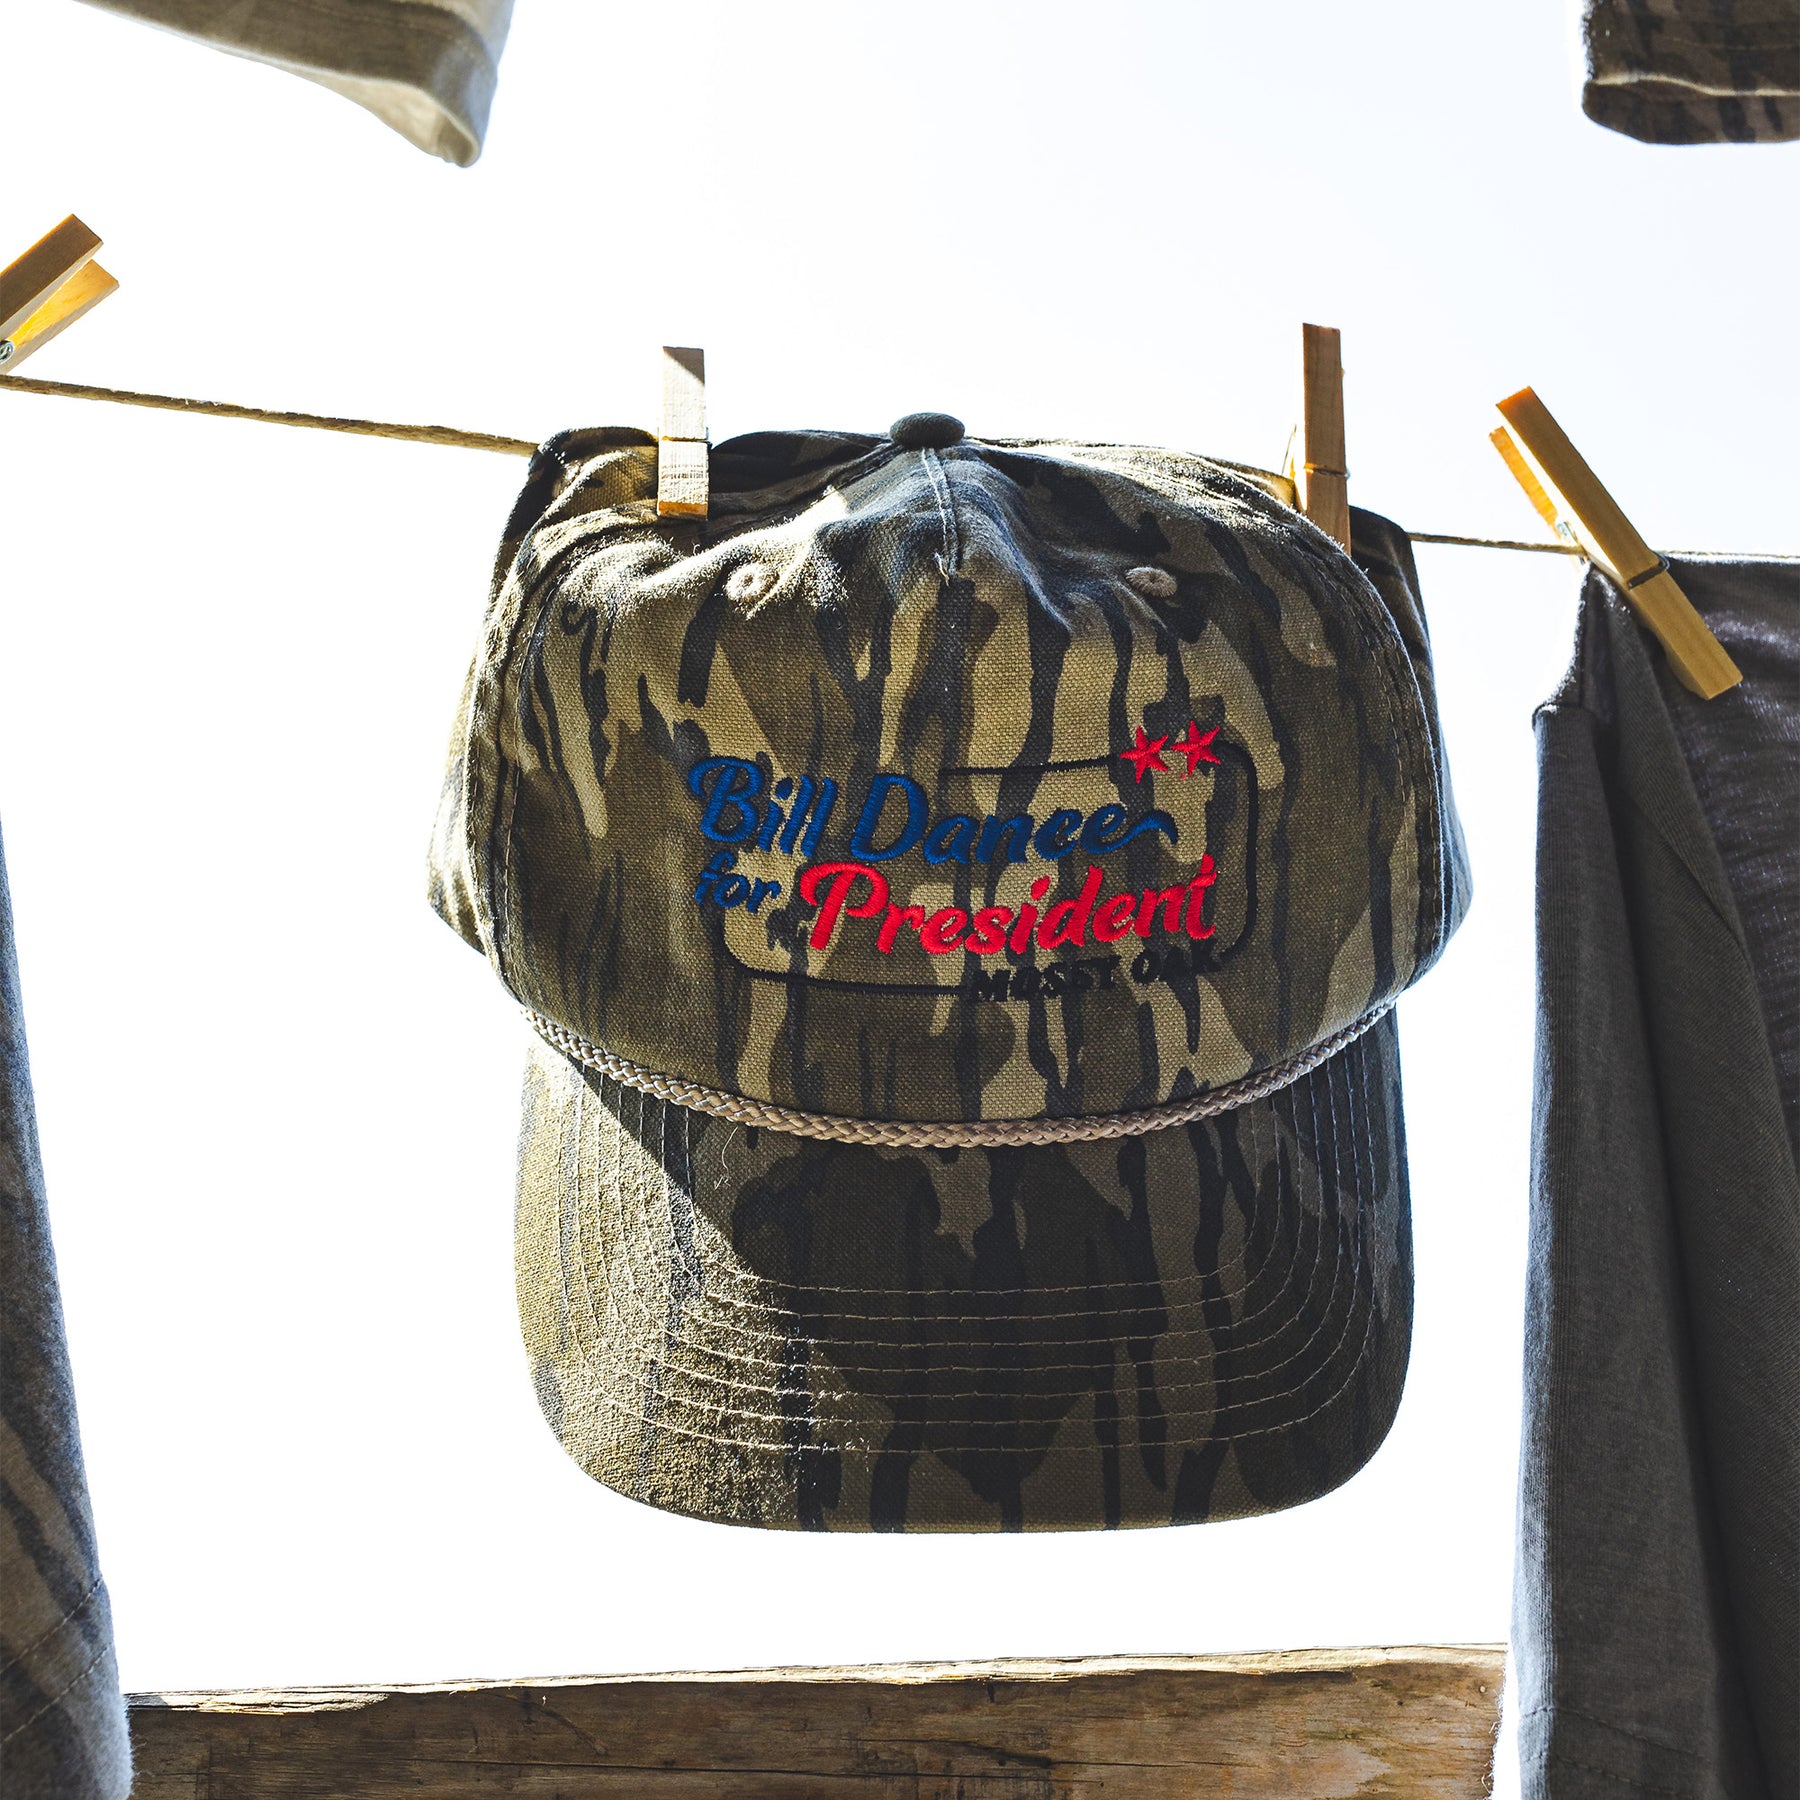 Bill Dance for President Rope Hat – The Mossy Oak Store